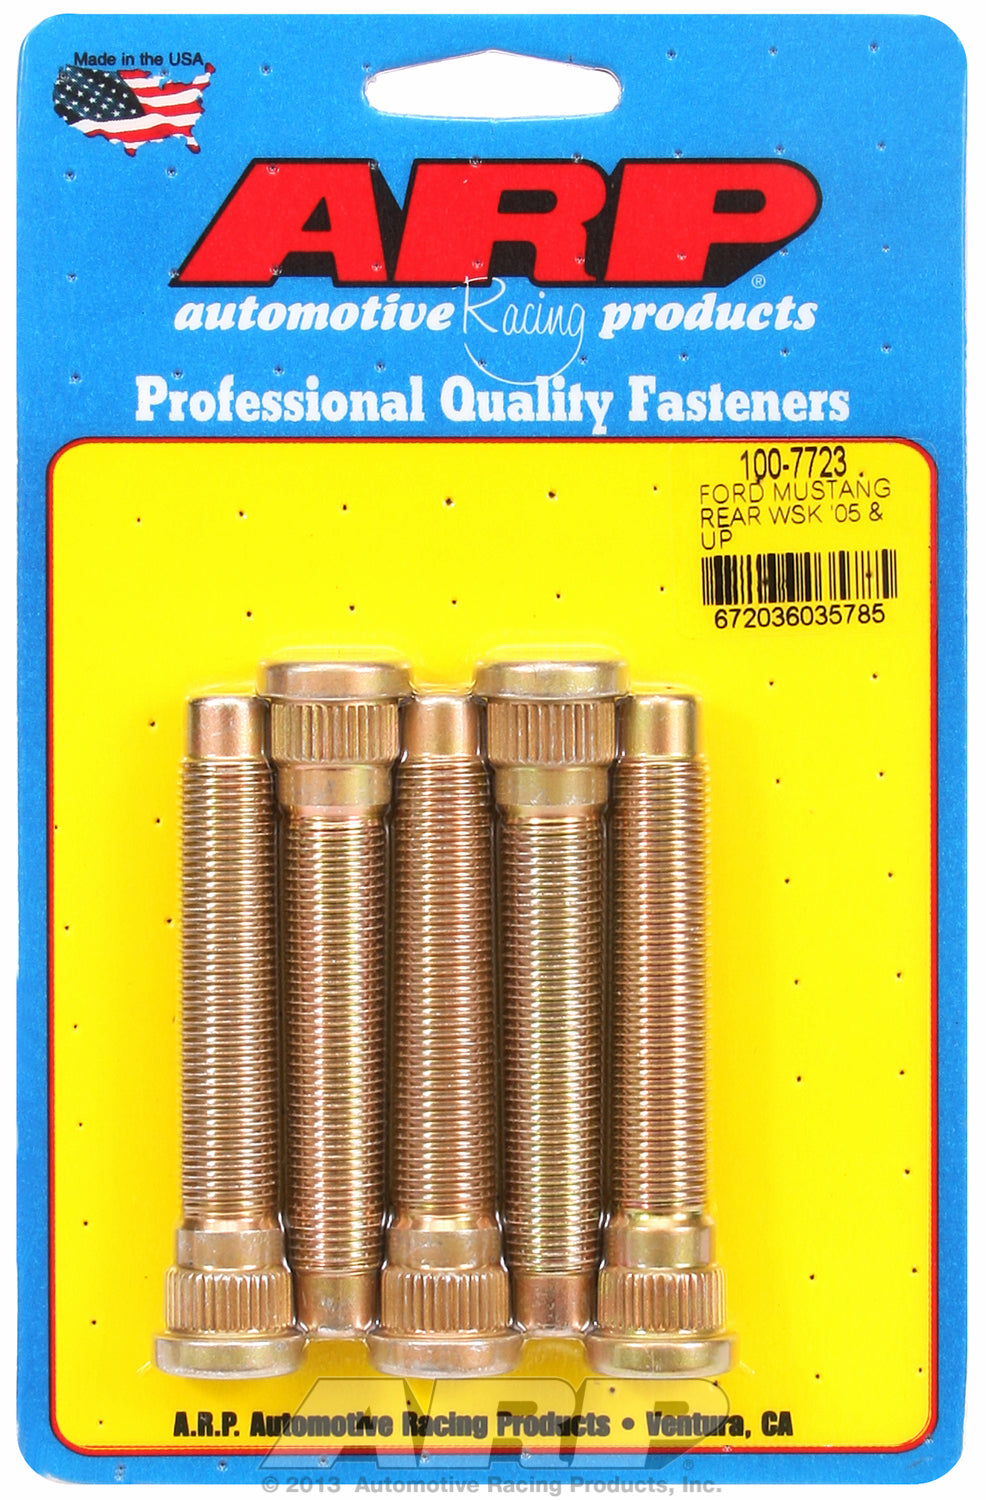 Wheel Stud Kit for Mustang (2005 & later) rear & most late model Fords w/ front & rear disc brakes